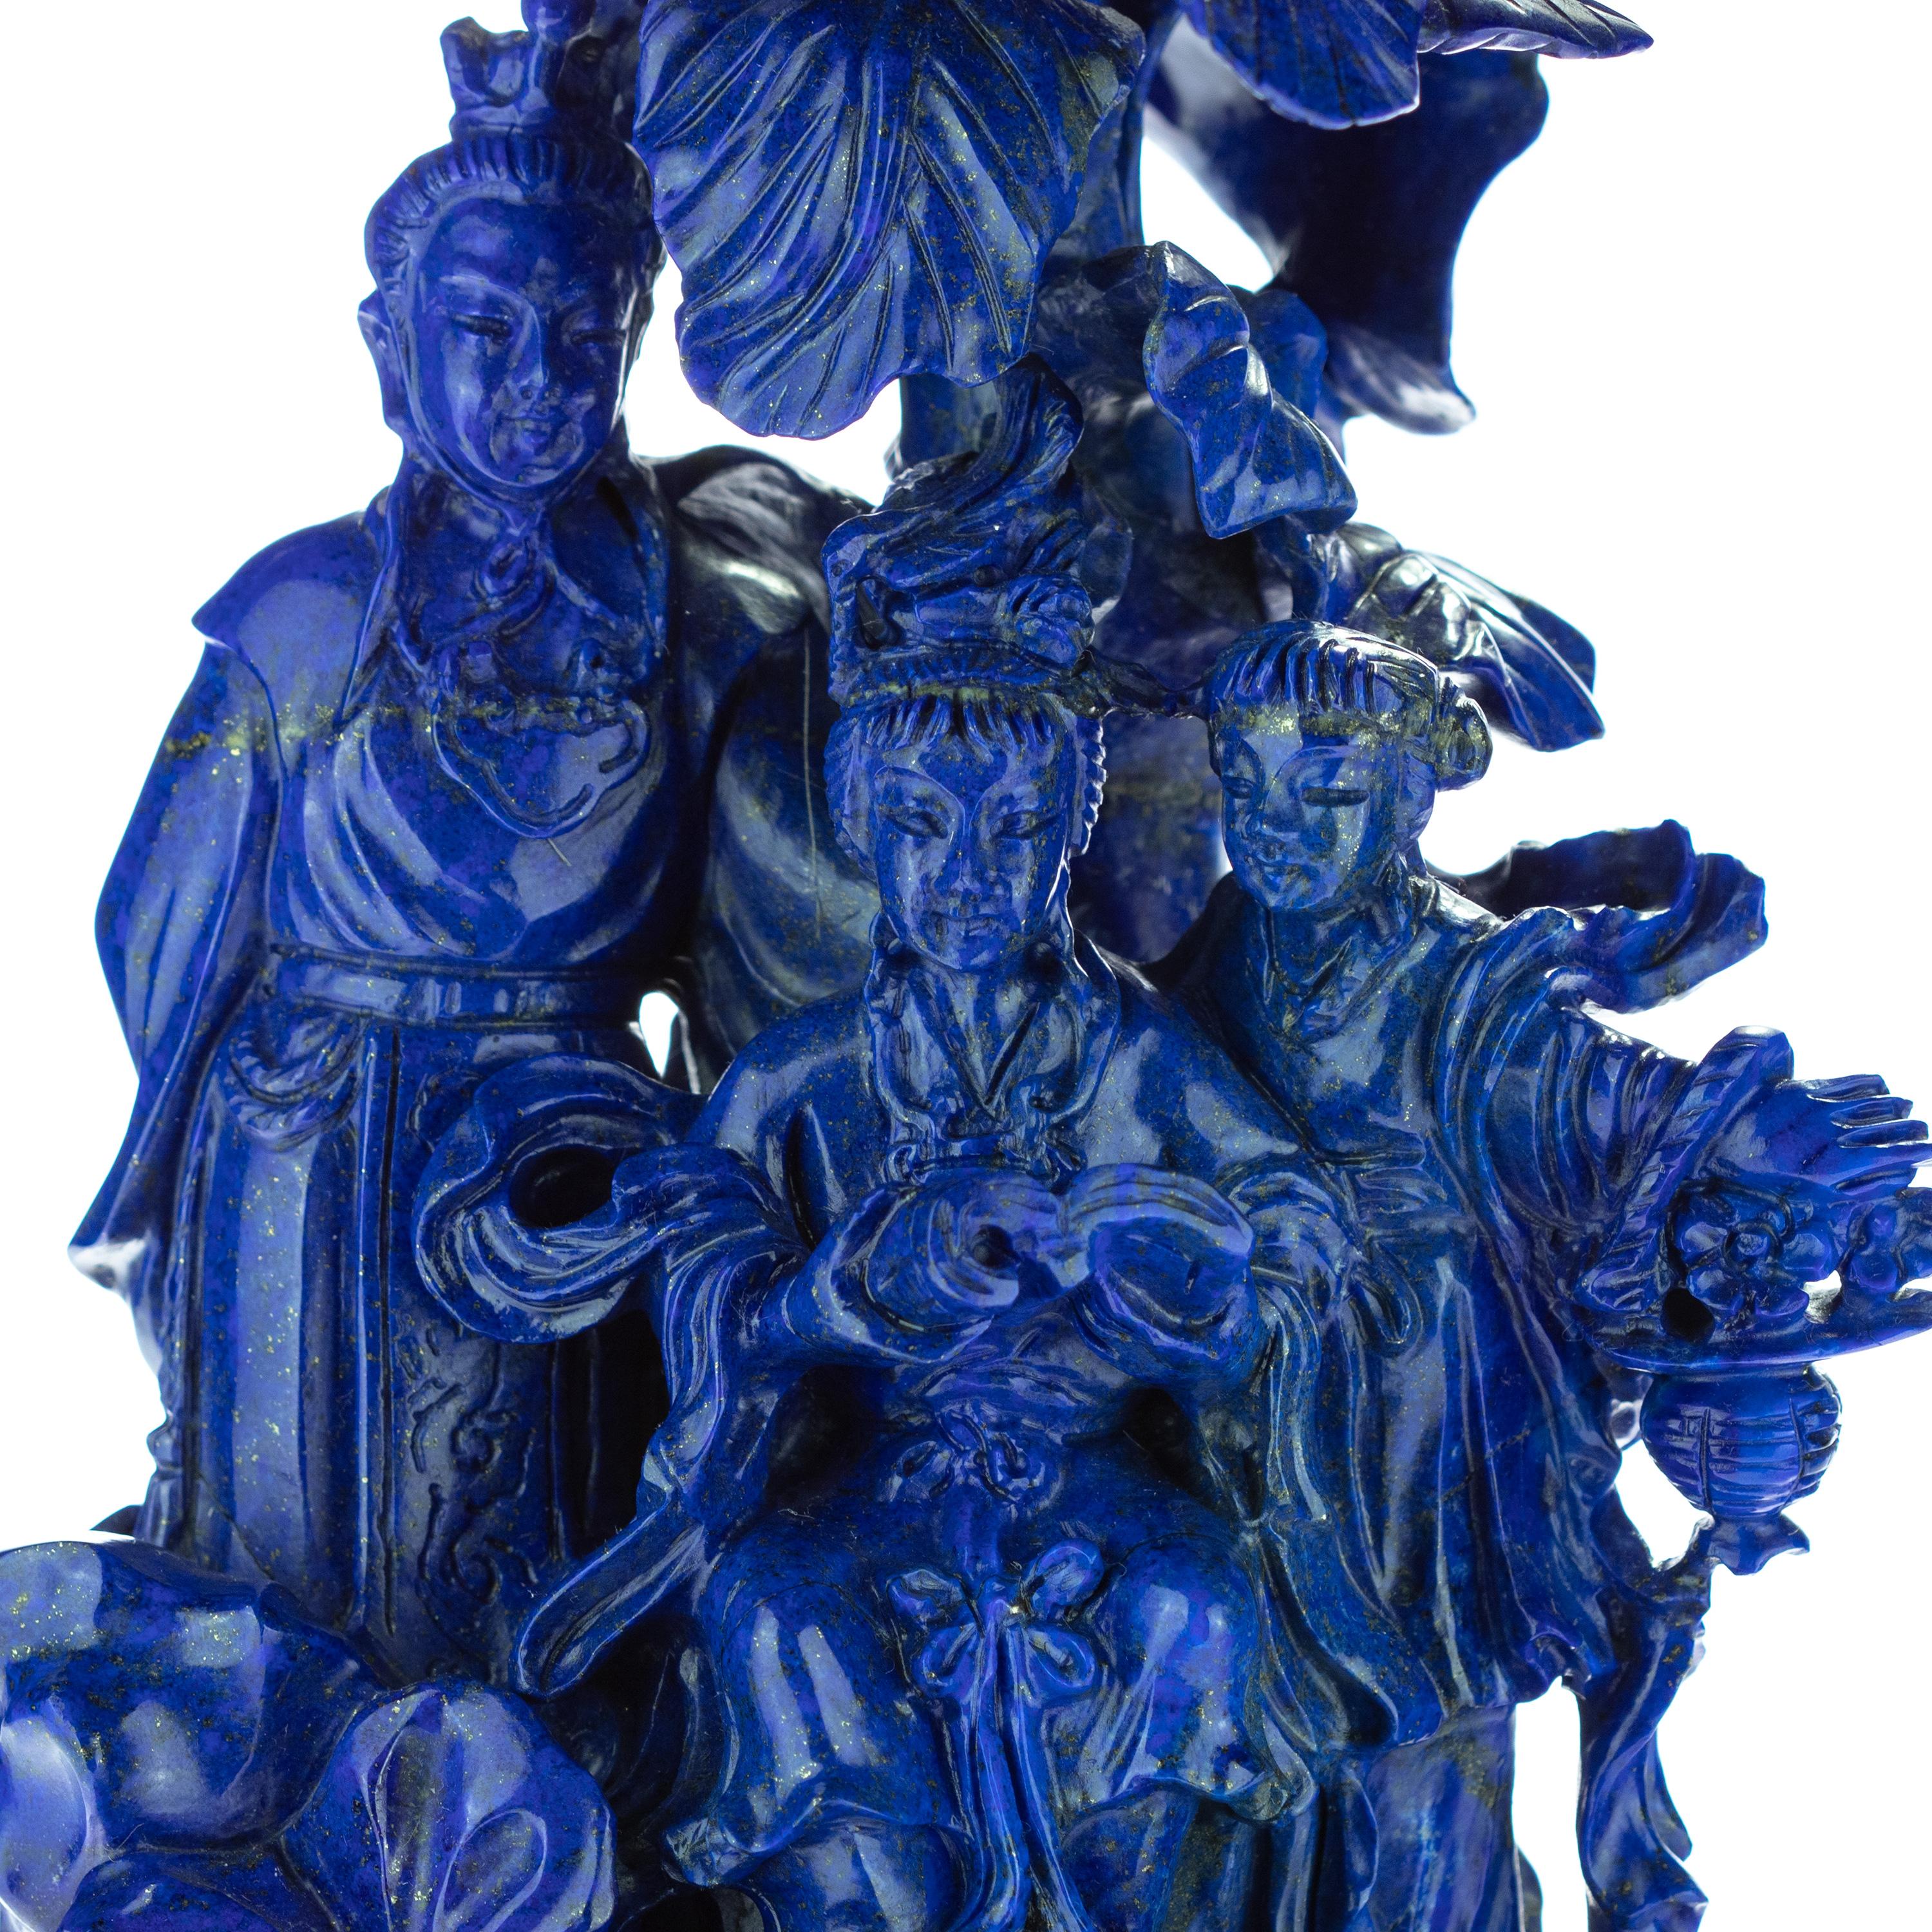 Hand-Carved Lapis Lazuli Imperial Family Carved Flower Gemstone Asian Art Statue Sculpture For Sale